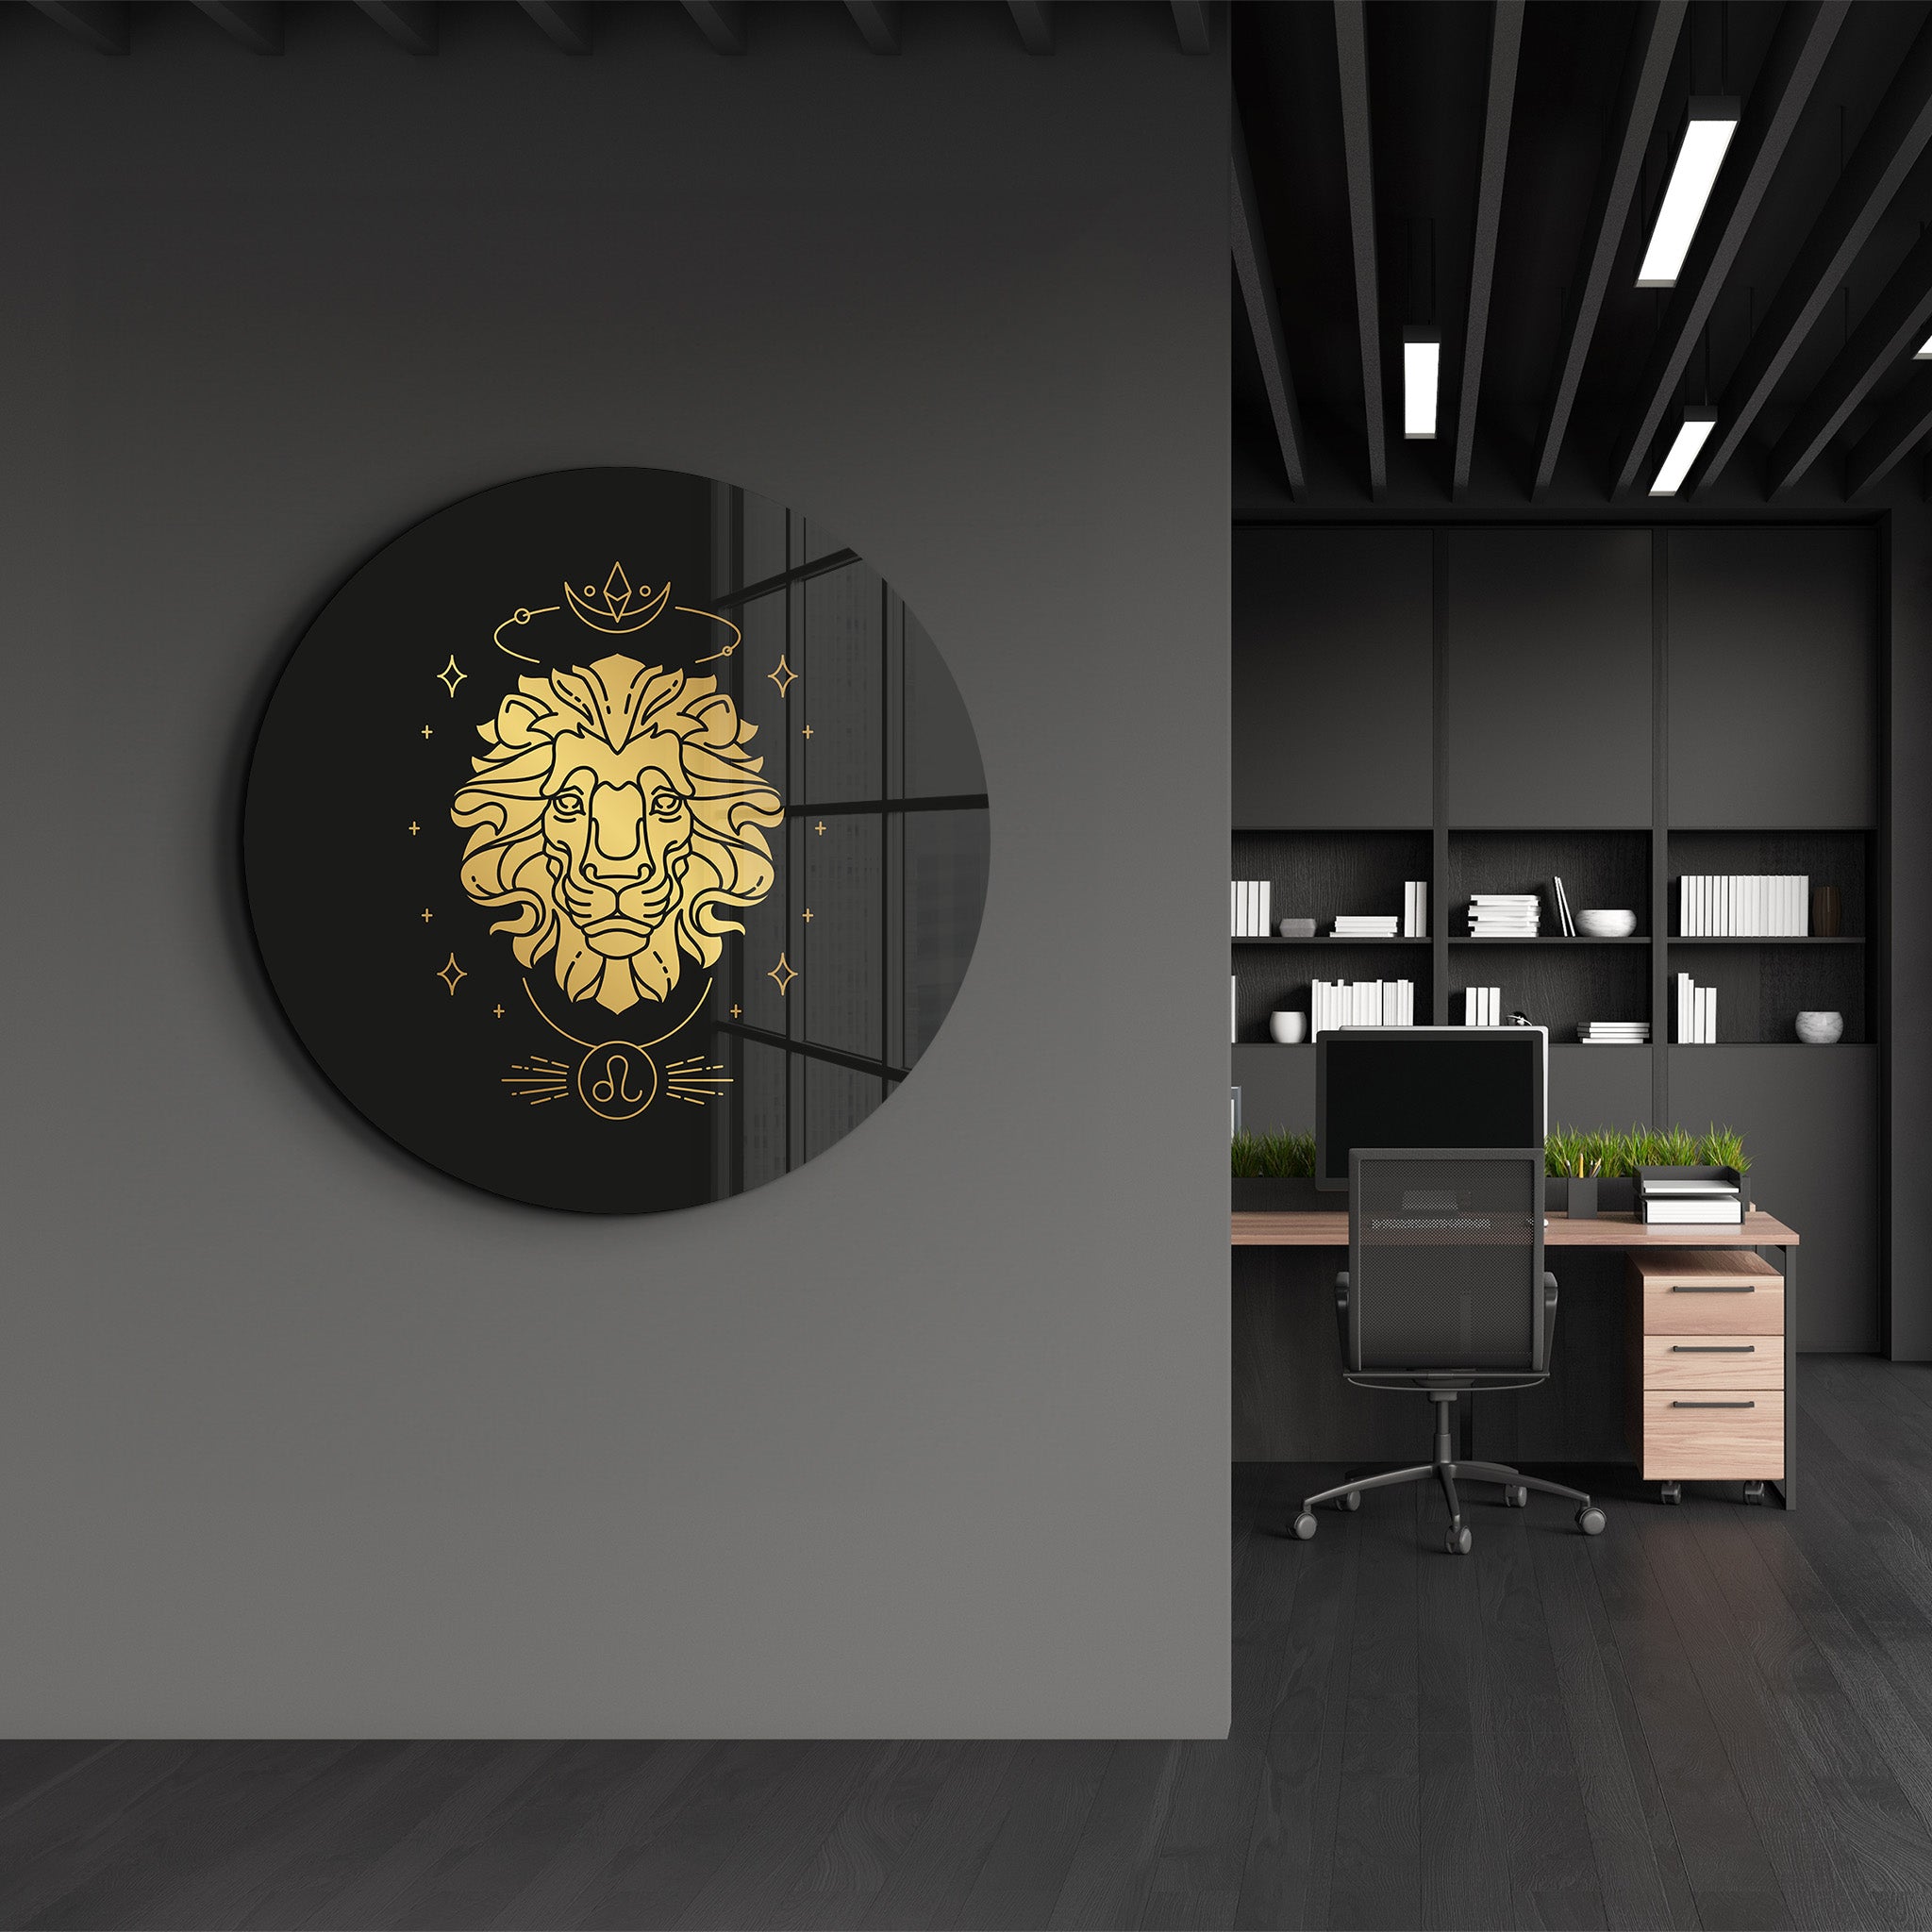 ・"Zodiac Signs - Leo"・Rounded Glass Wall Art